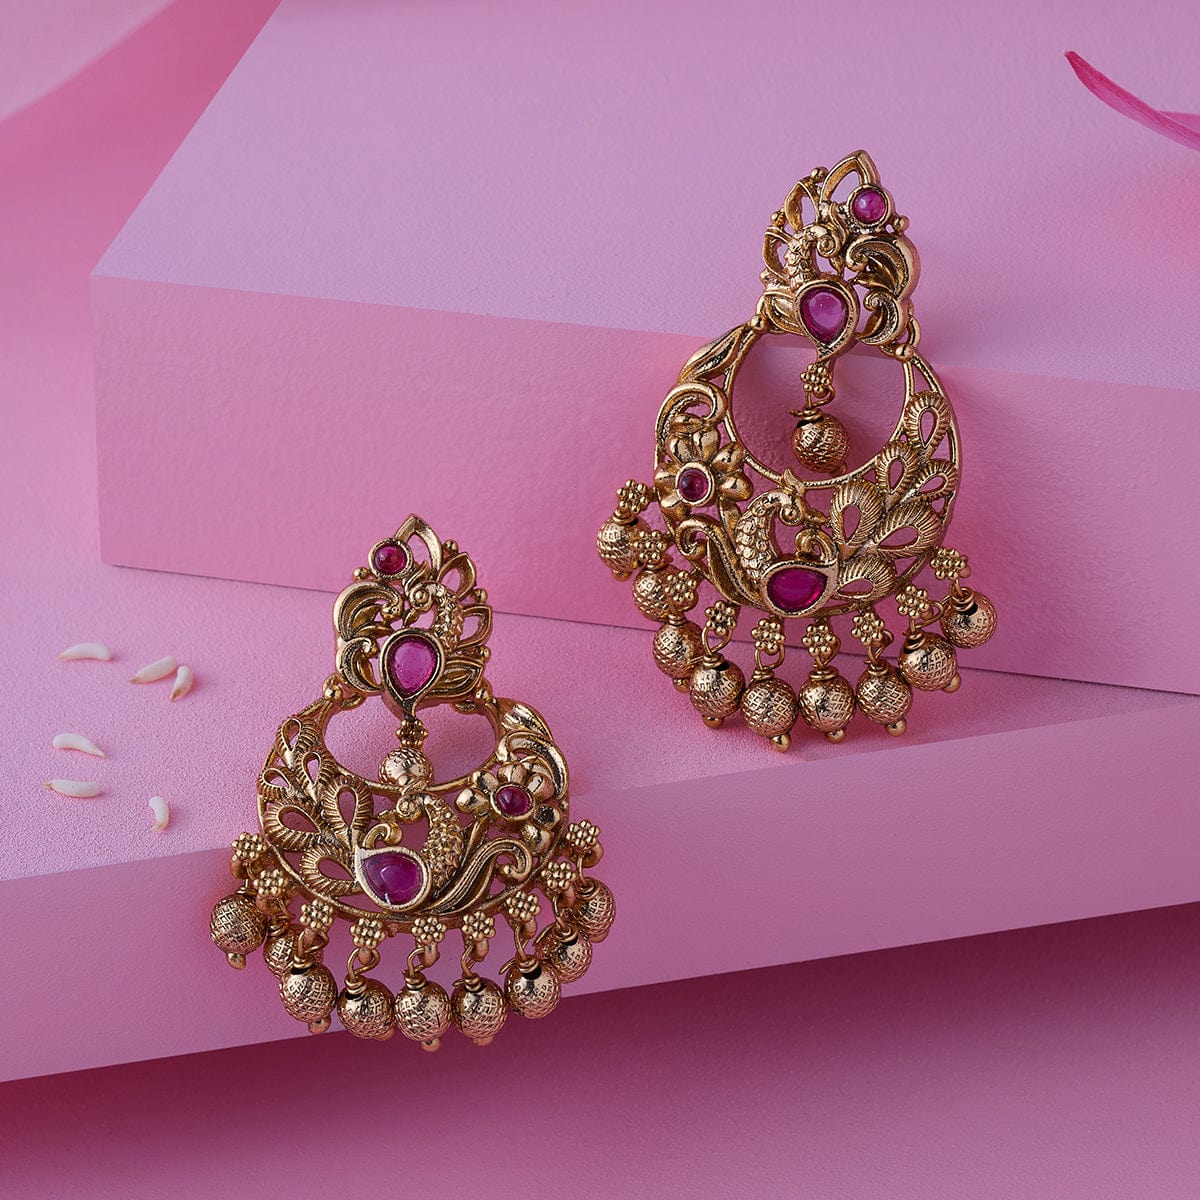 Kushal's Fashion Jewellery - Basket Top Earrings😉 Design No: 106575 Link  In Comments To Shop! | Facebook